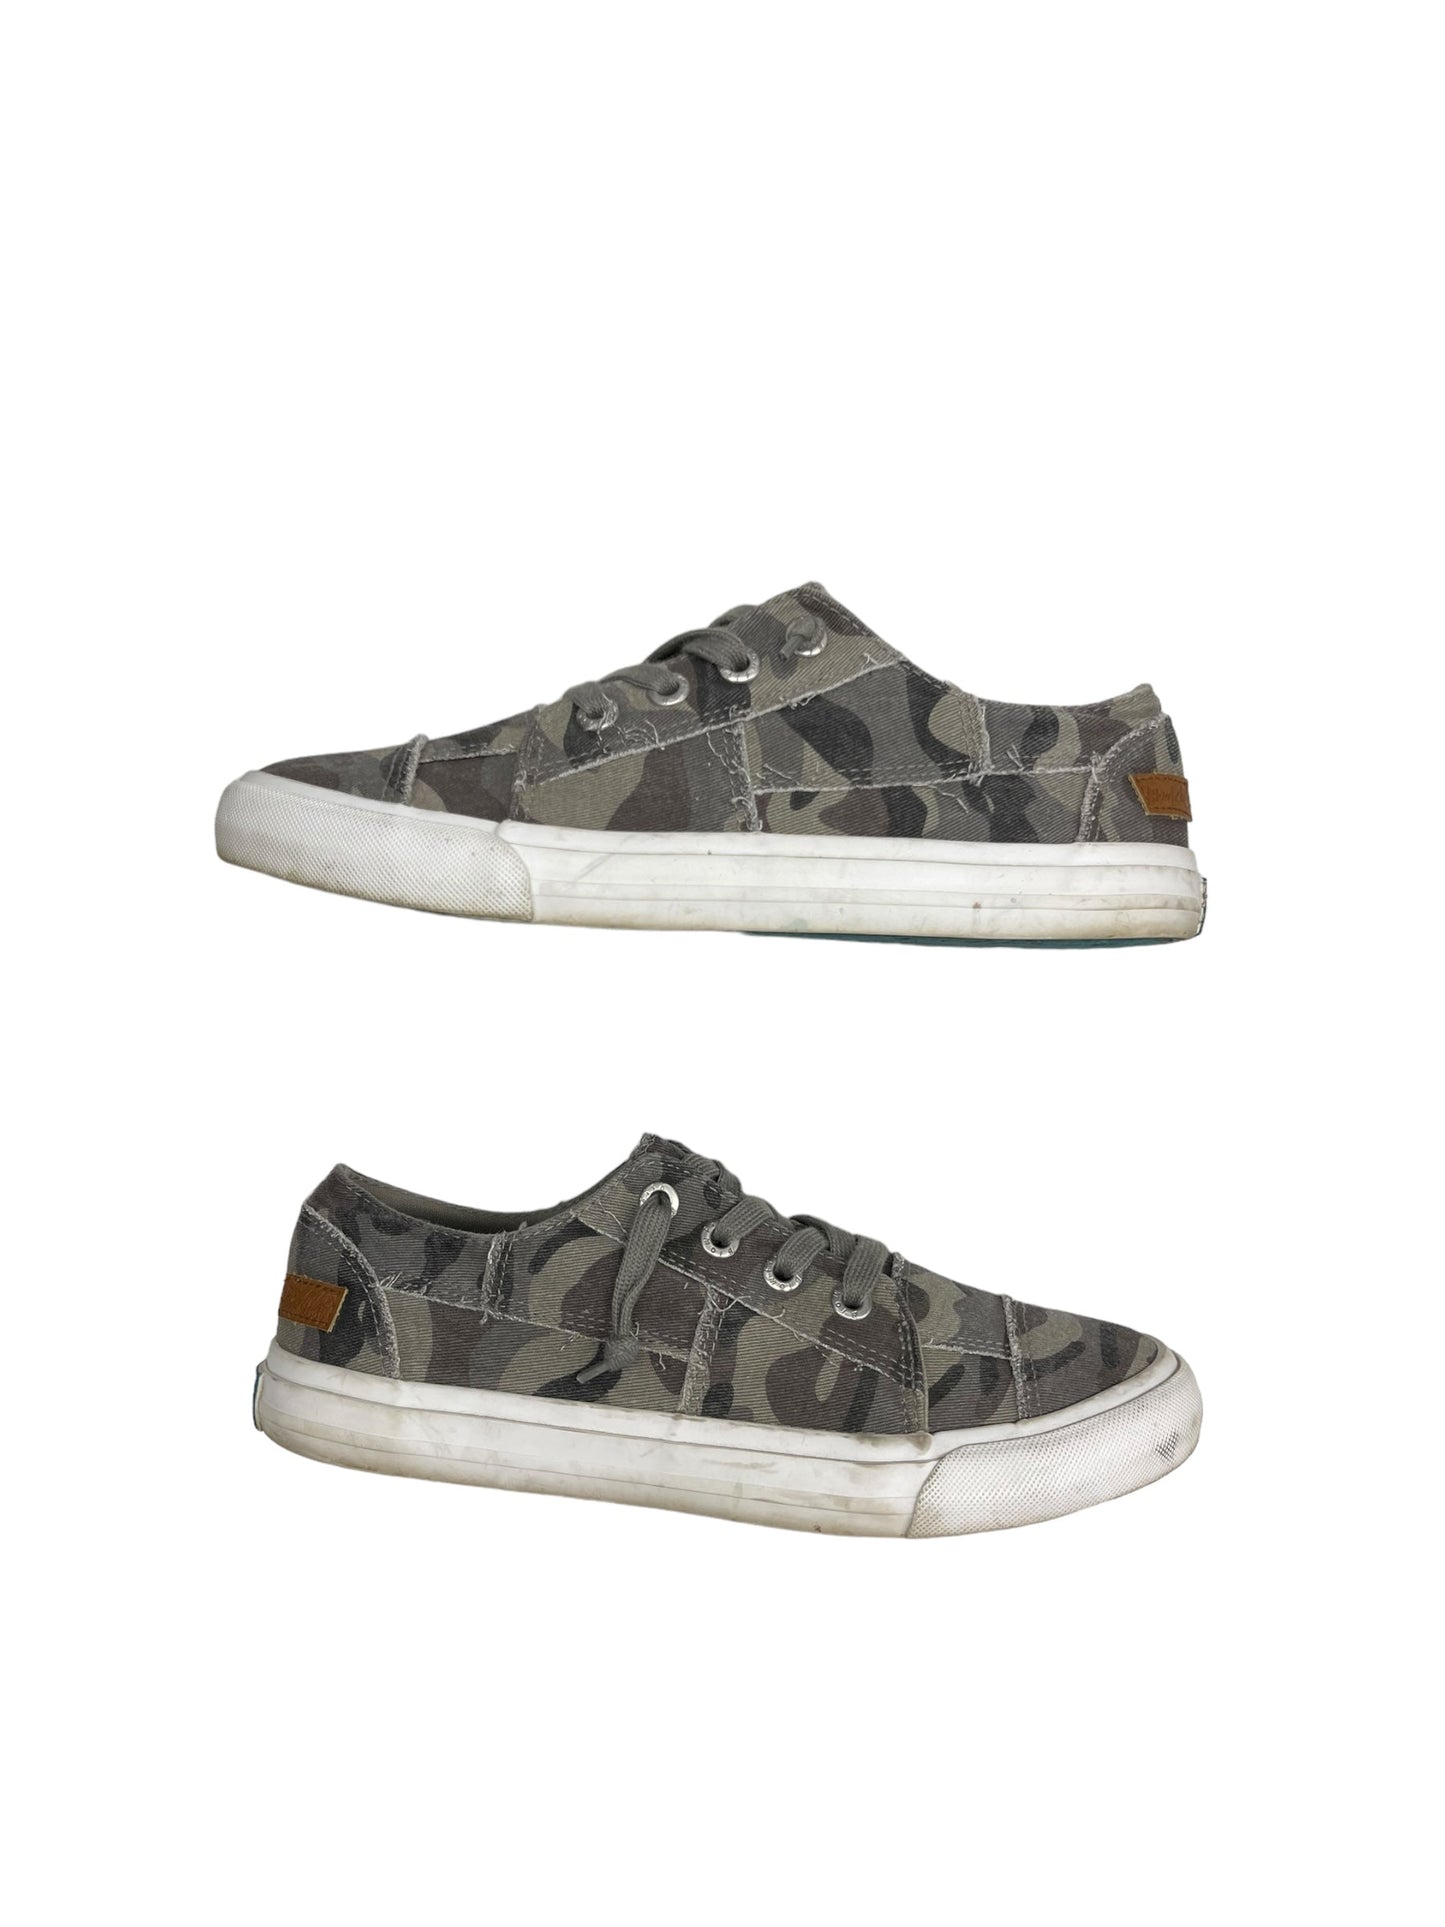 Camouflage Print Shoes Sneakers Blowfish, Size 9.5